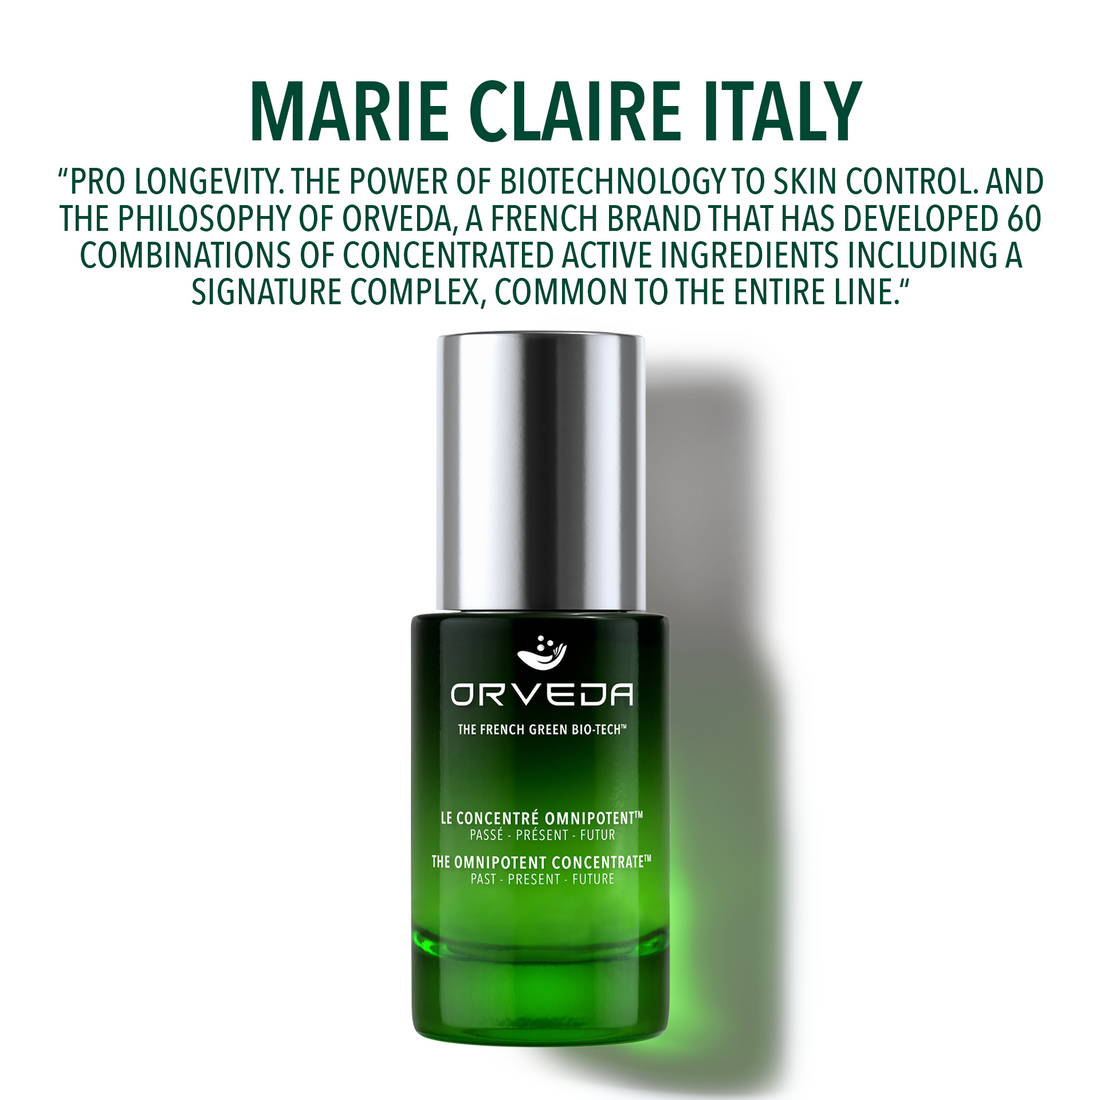 MARIE CLAIRE ITALY